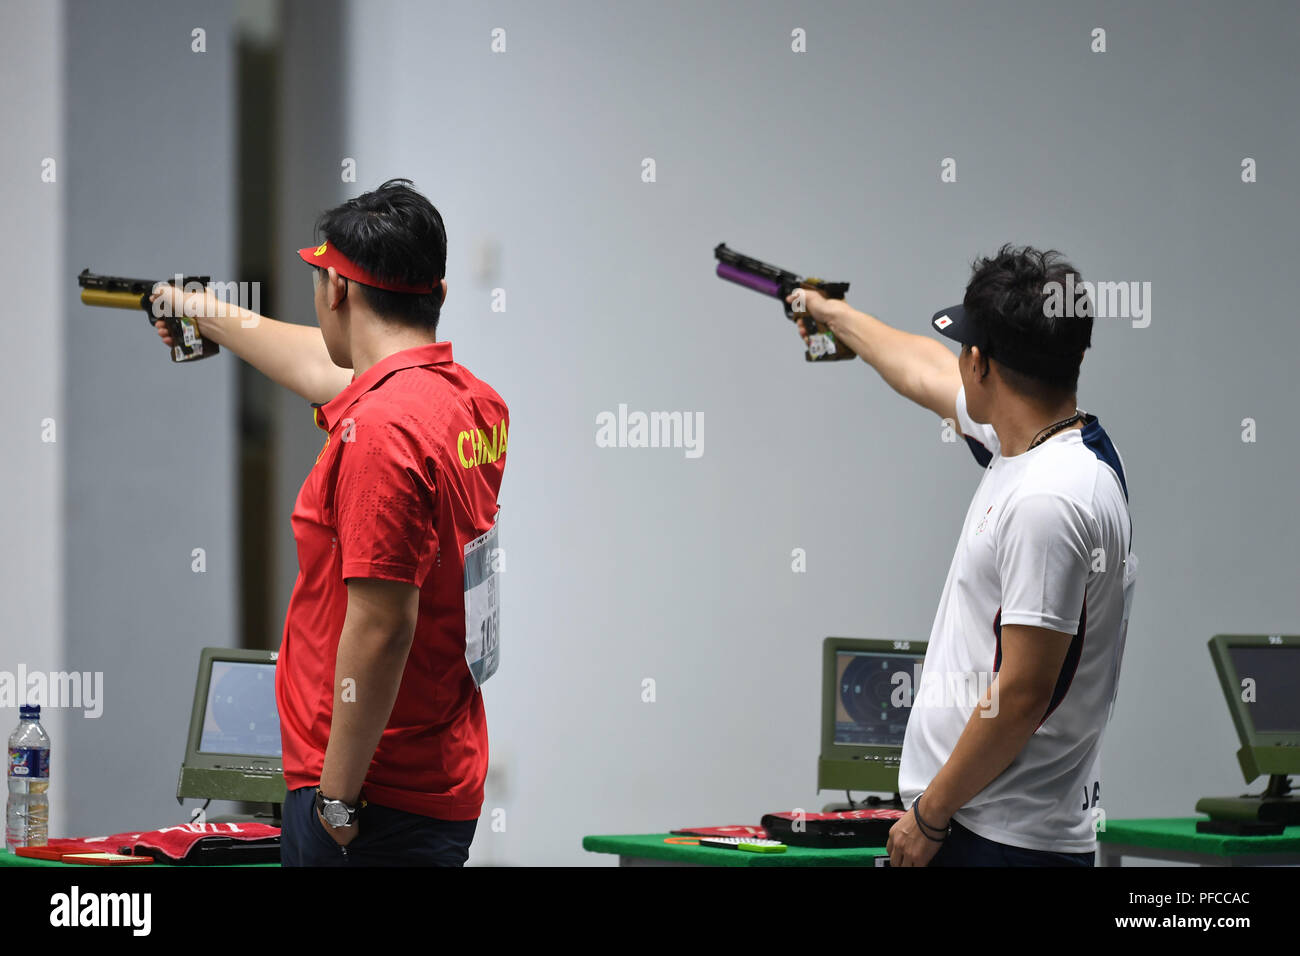 Palembang. 21st Aug, 2018. Matsuda Tomoyuki (R) of Japan and Wu Jiayu of China compete during the men's 10m Air Pistol final at the 18th Asian Games in Palembang, Indonesia on Aug. 21, 2018. Matsuda Tomoyuki won the silver medal and Wu Jiayu got the 4th place. Credit: Liu Ailun/Xinhua/Alamy Live News Stock Photo